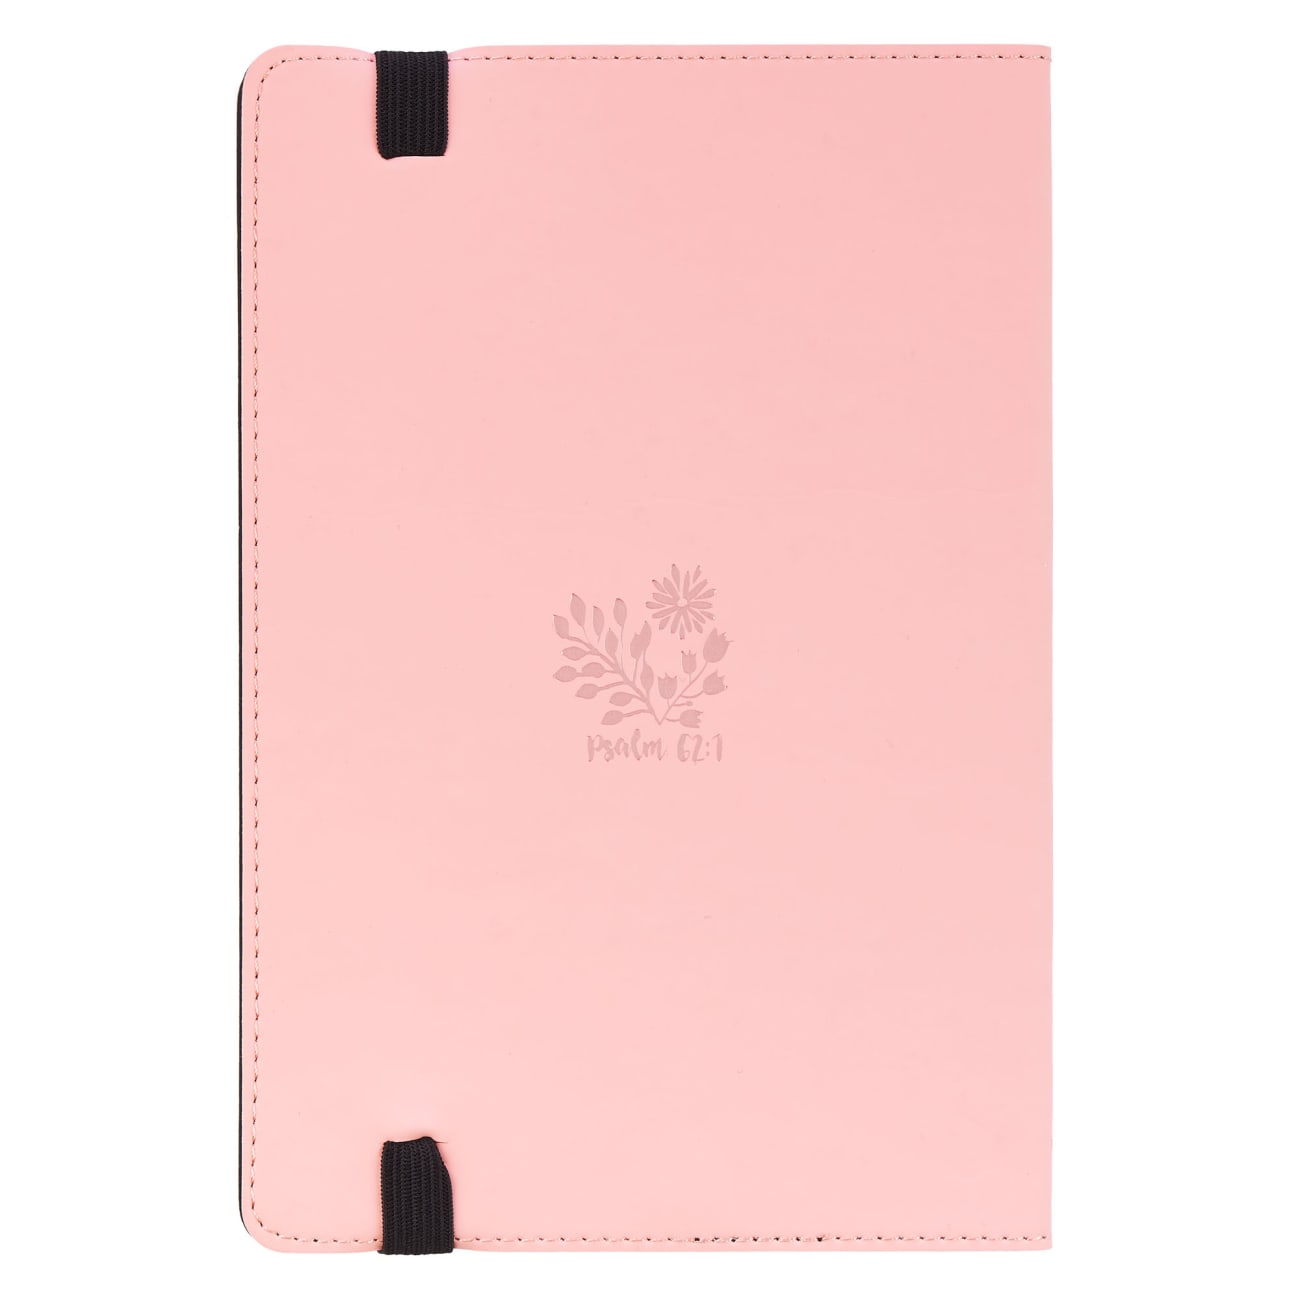 Dot Grid Journal: My Soul Finds, Pink With Elastic Closure Imitation Leather